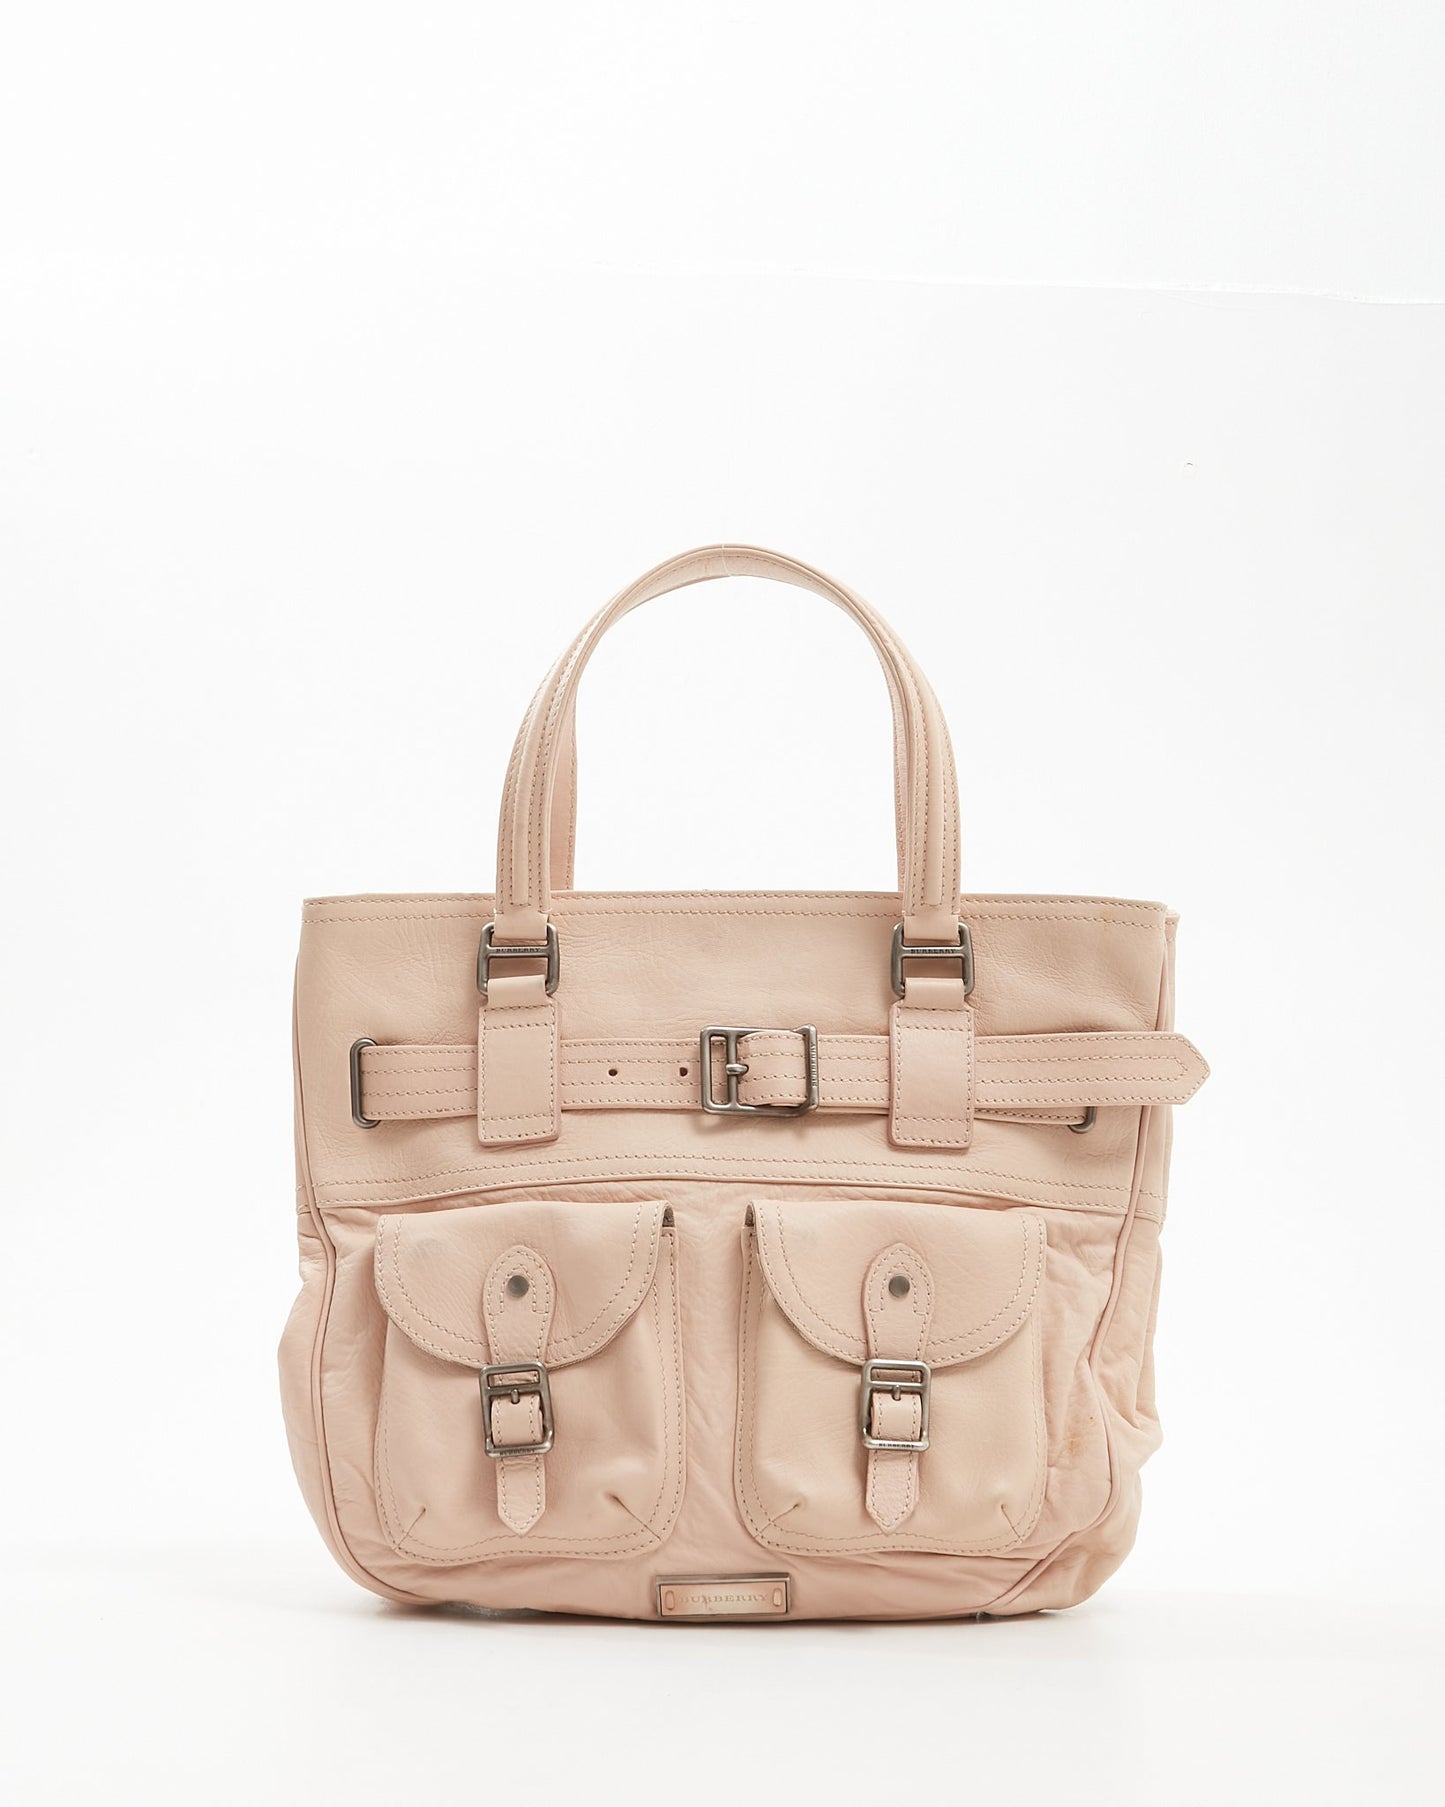 Burberry Beige Leather Tote